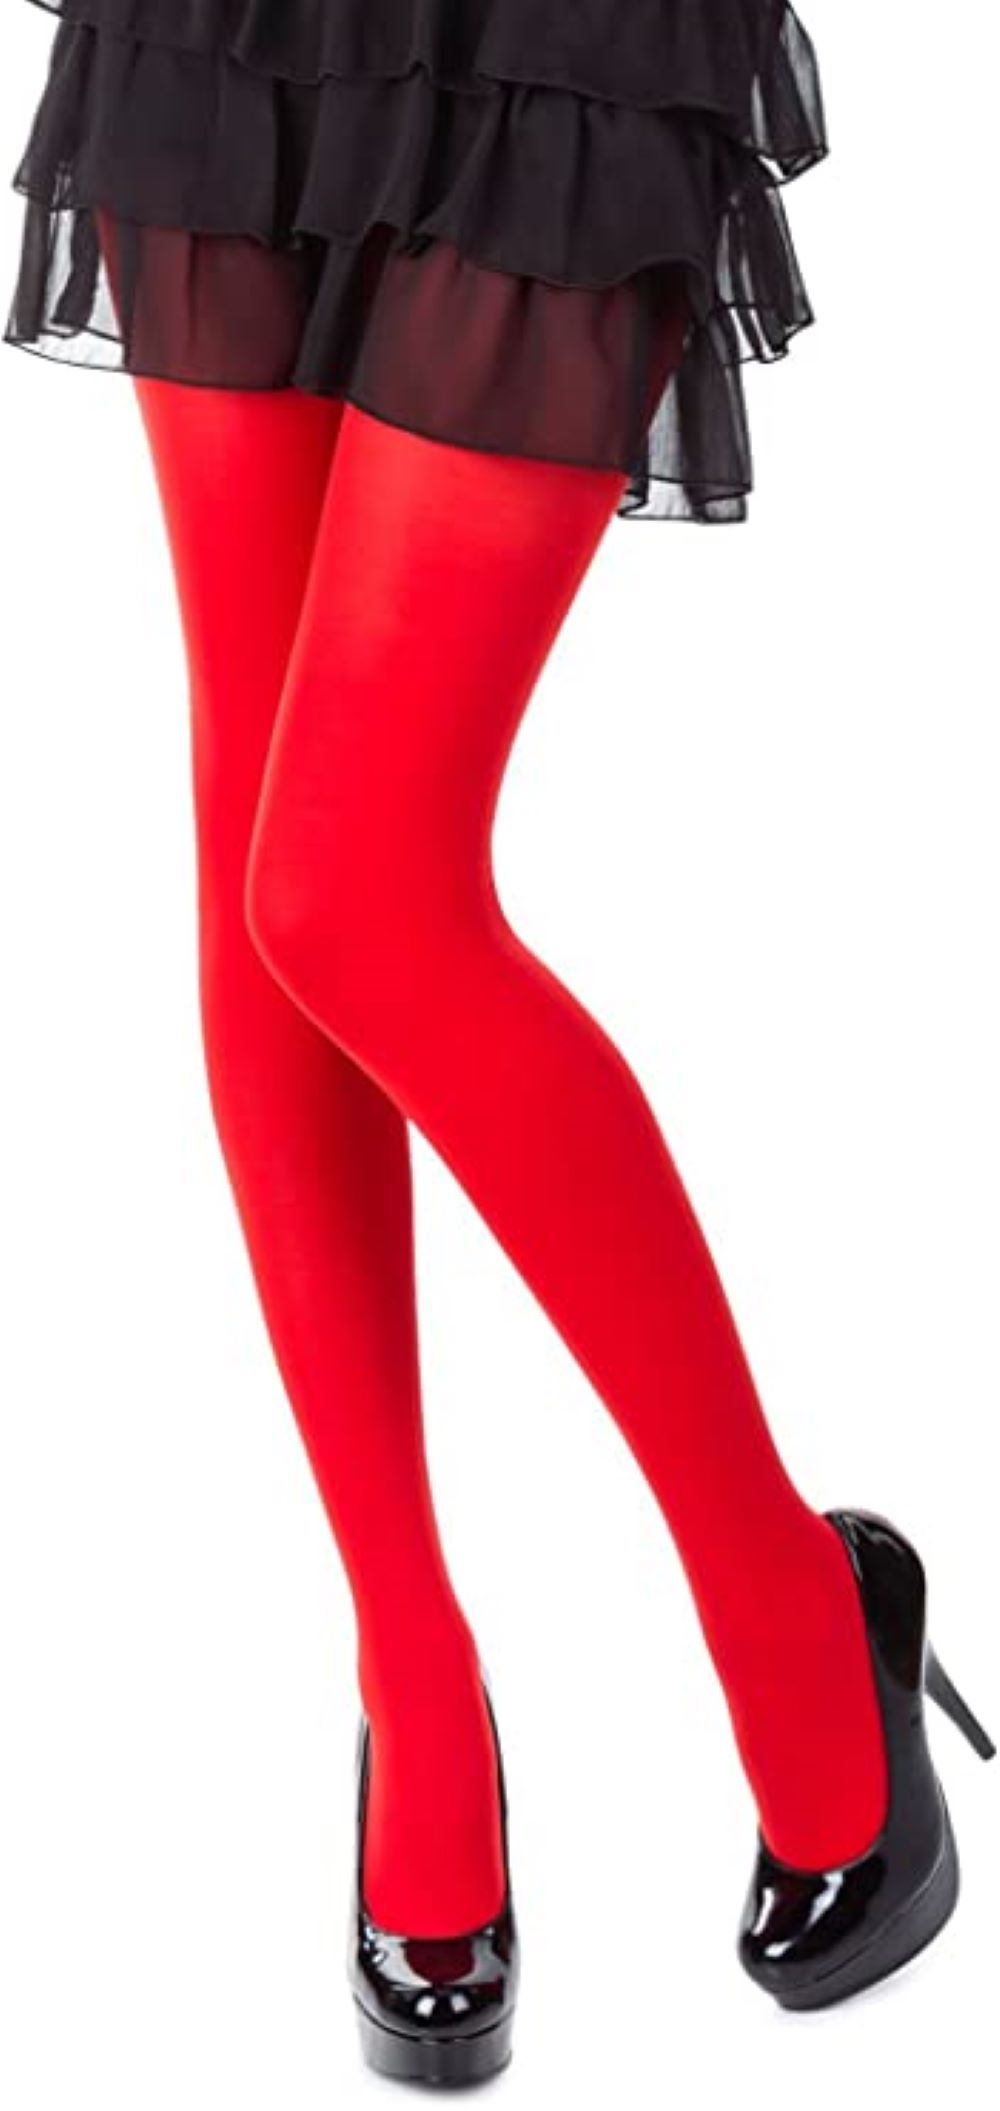 10 pcs - Elastic Red Colour Tights - Size S/M|GCL149|UK SELLER